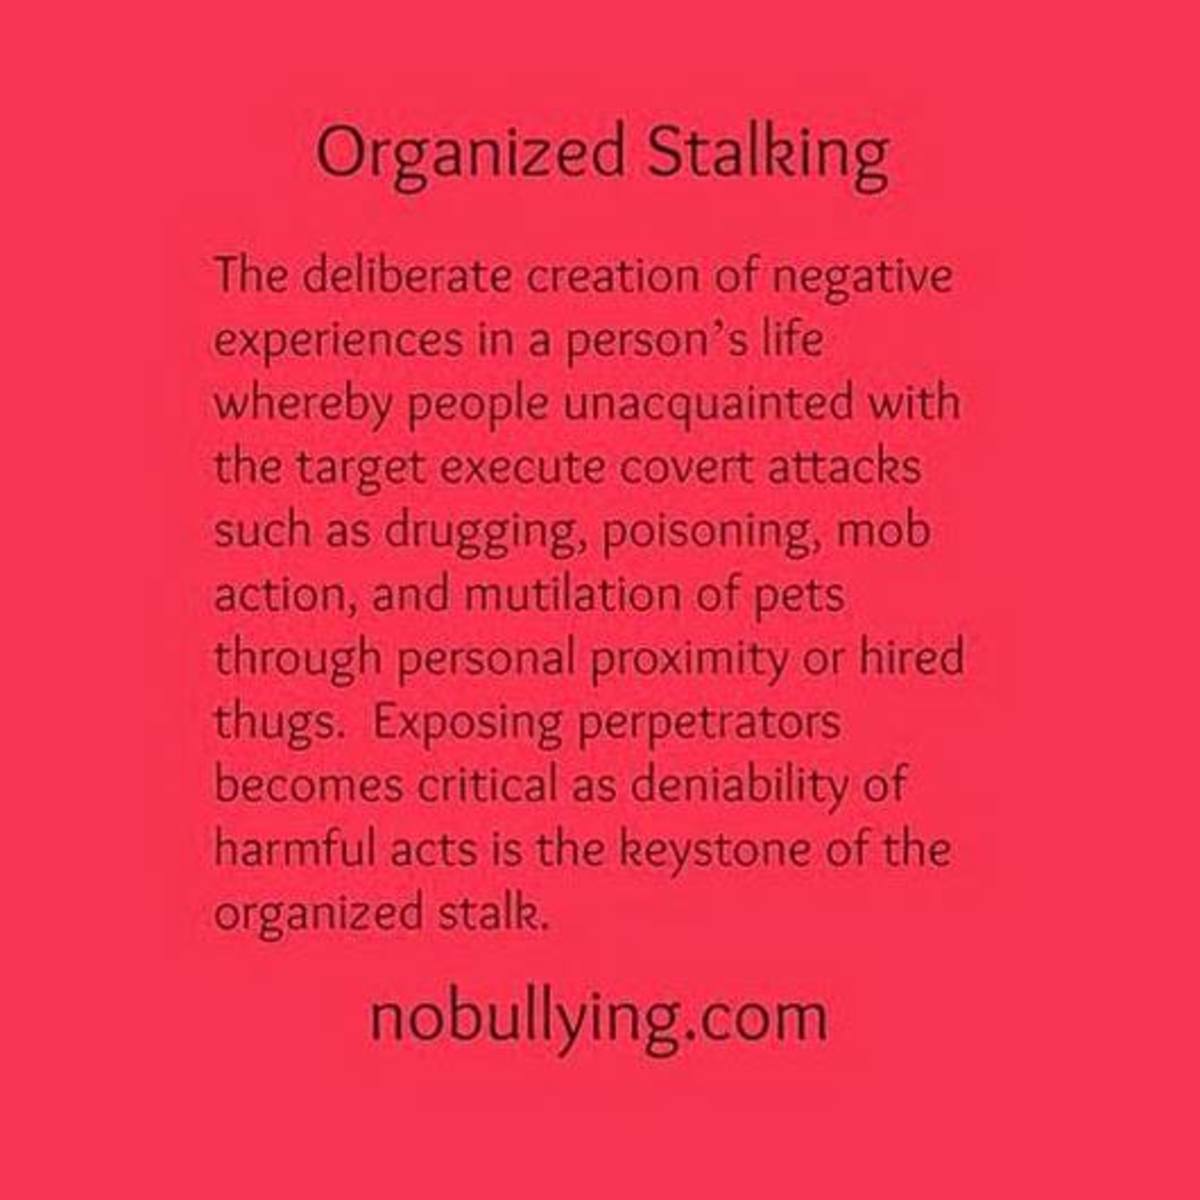 Multiple perpetrator stalking is much worse than this in our experience, with the goals of homelessness, suicide or "accidental death," or the victim being committed.